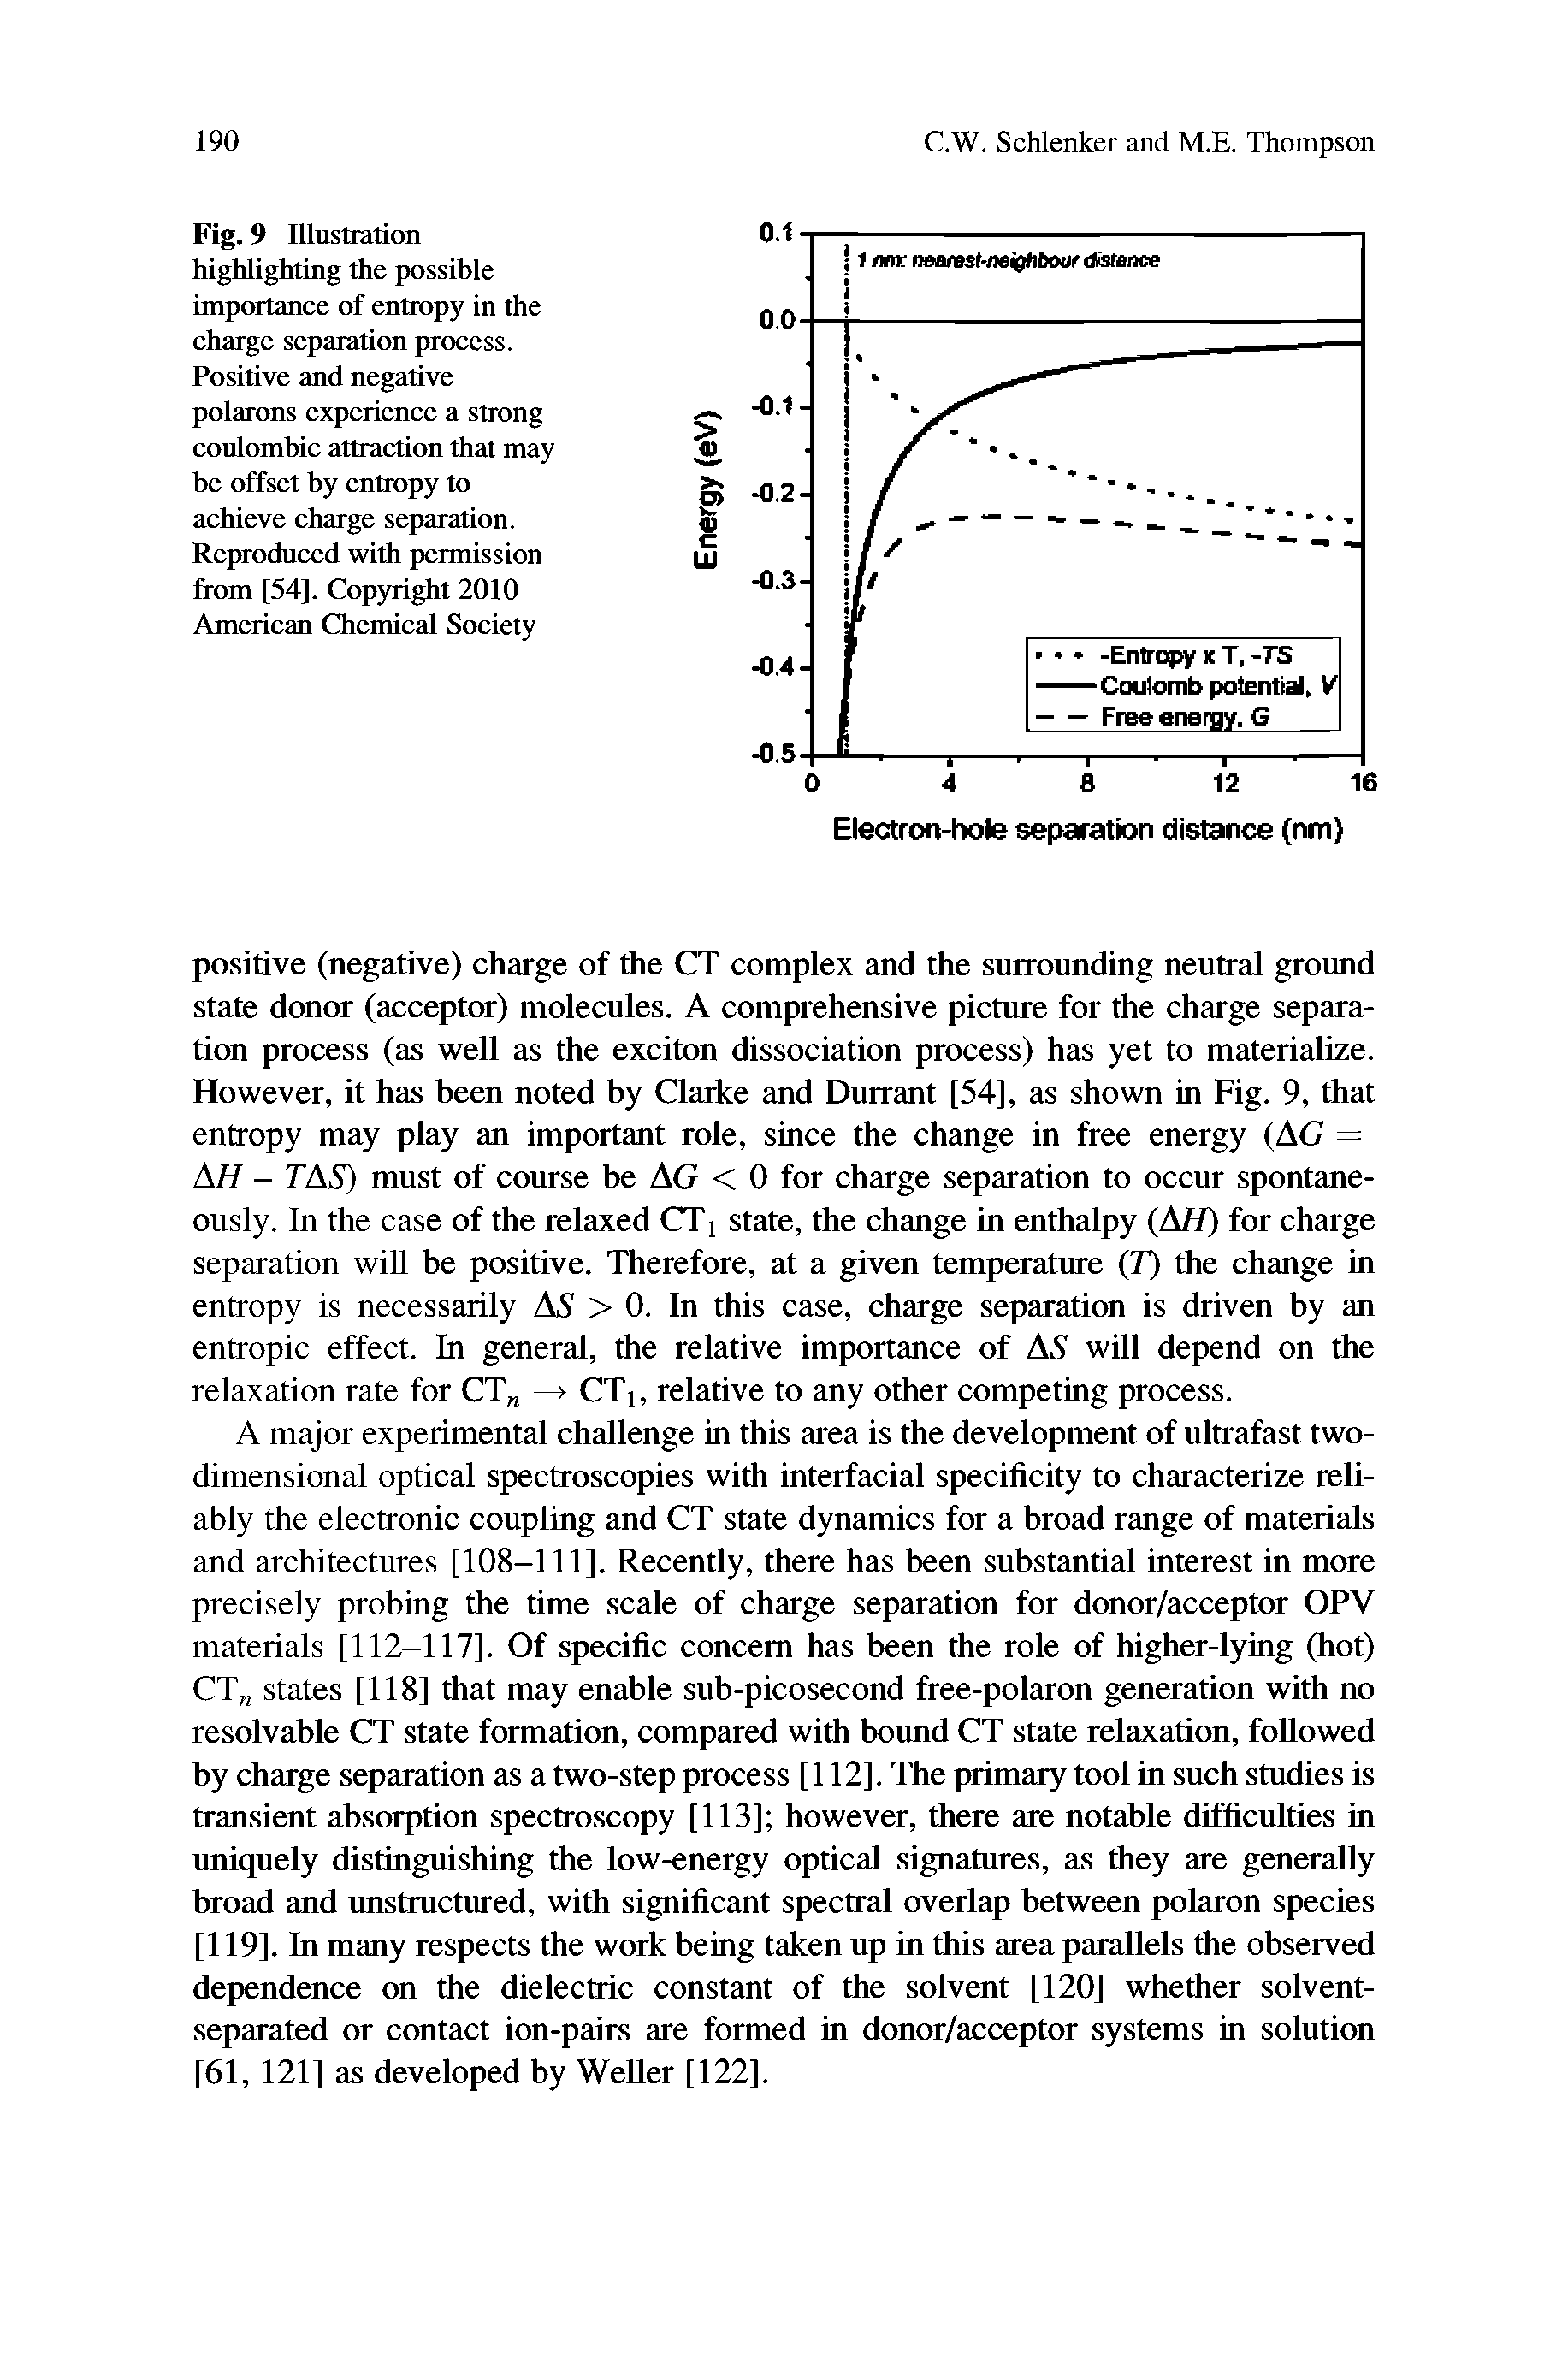 Fig. 9 Illustration highlighting the possible importance of entropy in the charge separation process. Positive and negative polarons experience a strong coulombic attraction that may be offset by entropy to achieve charge separation. Reproduced with permission from [54]. Copyright 2010 American Chemical Society...